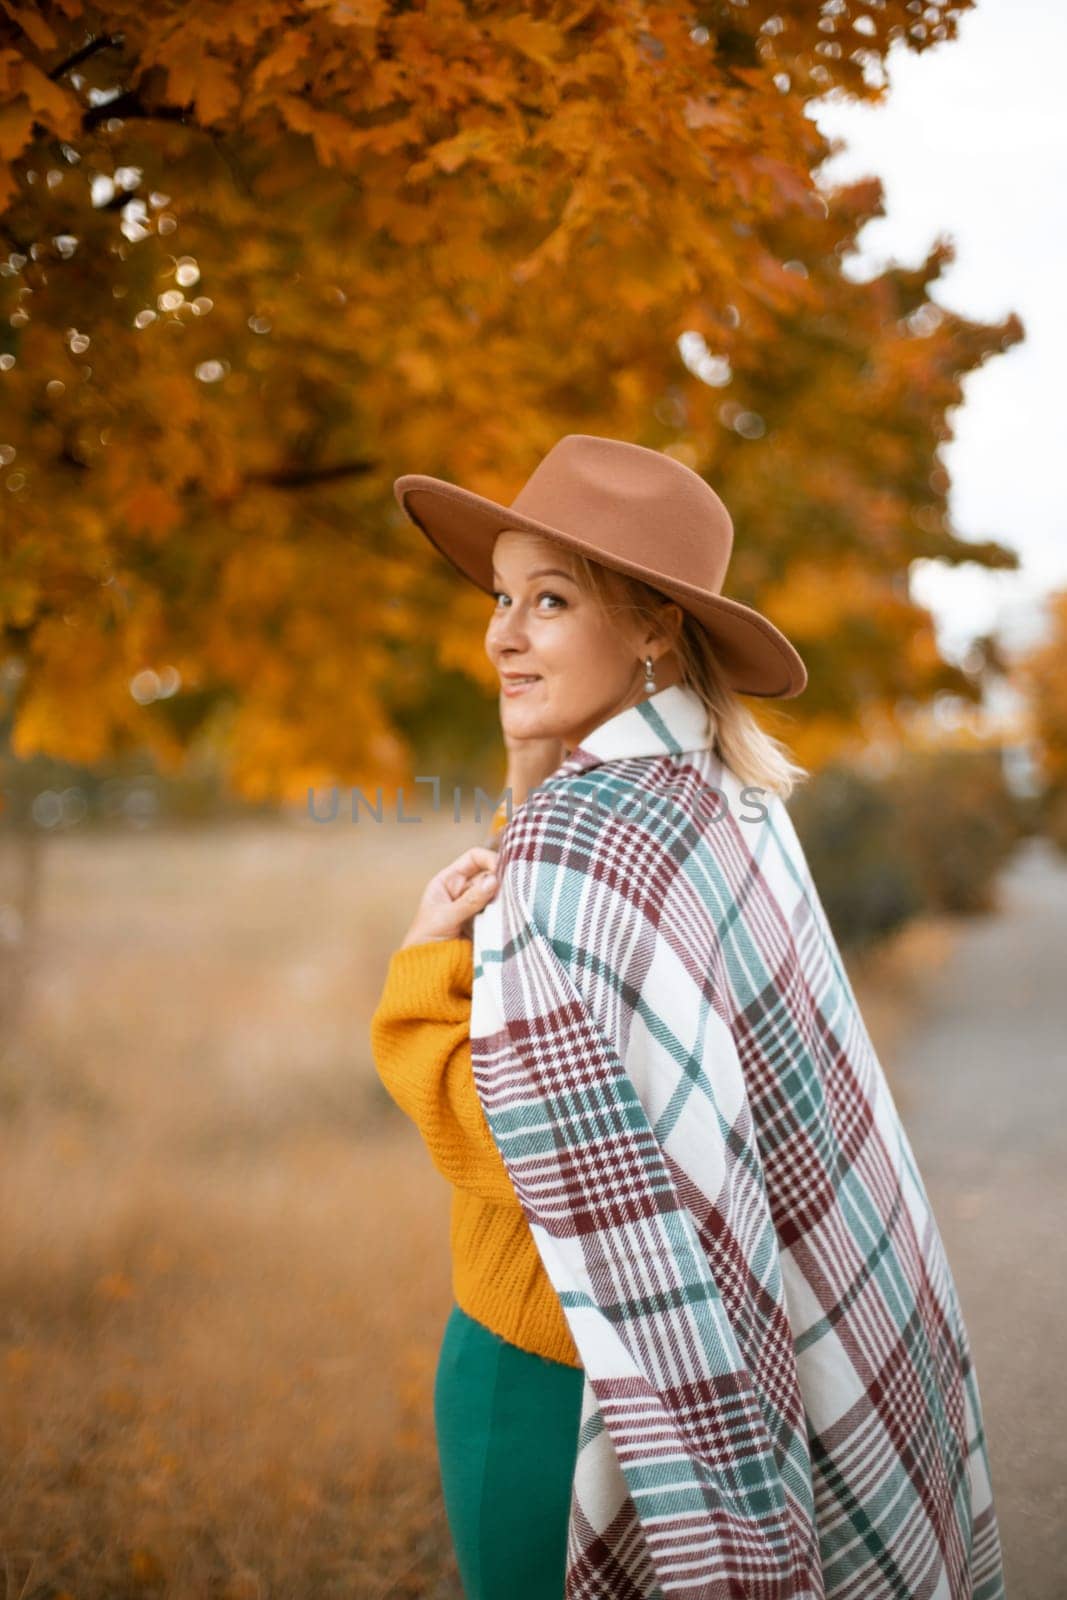 autumn woman in a green dress, brown hat, plaid, against the background of an autumn tree by Matiunina